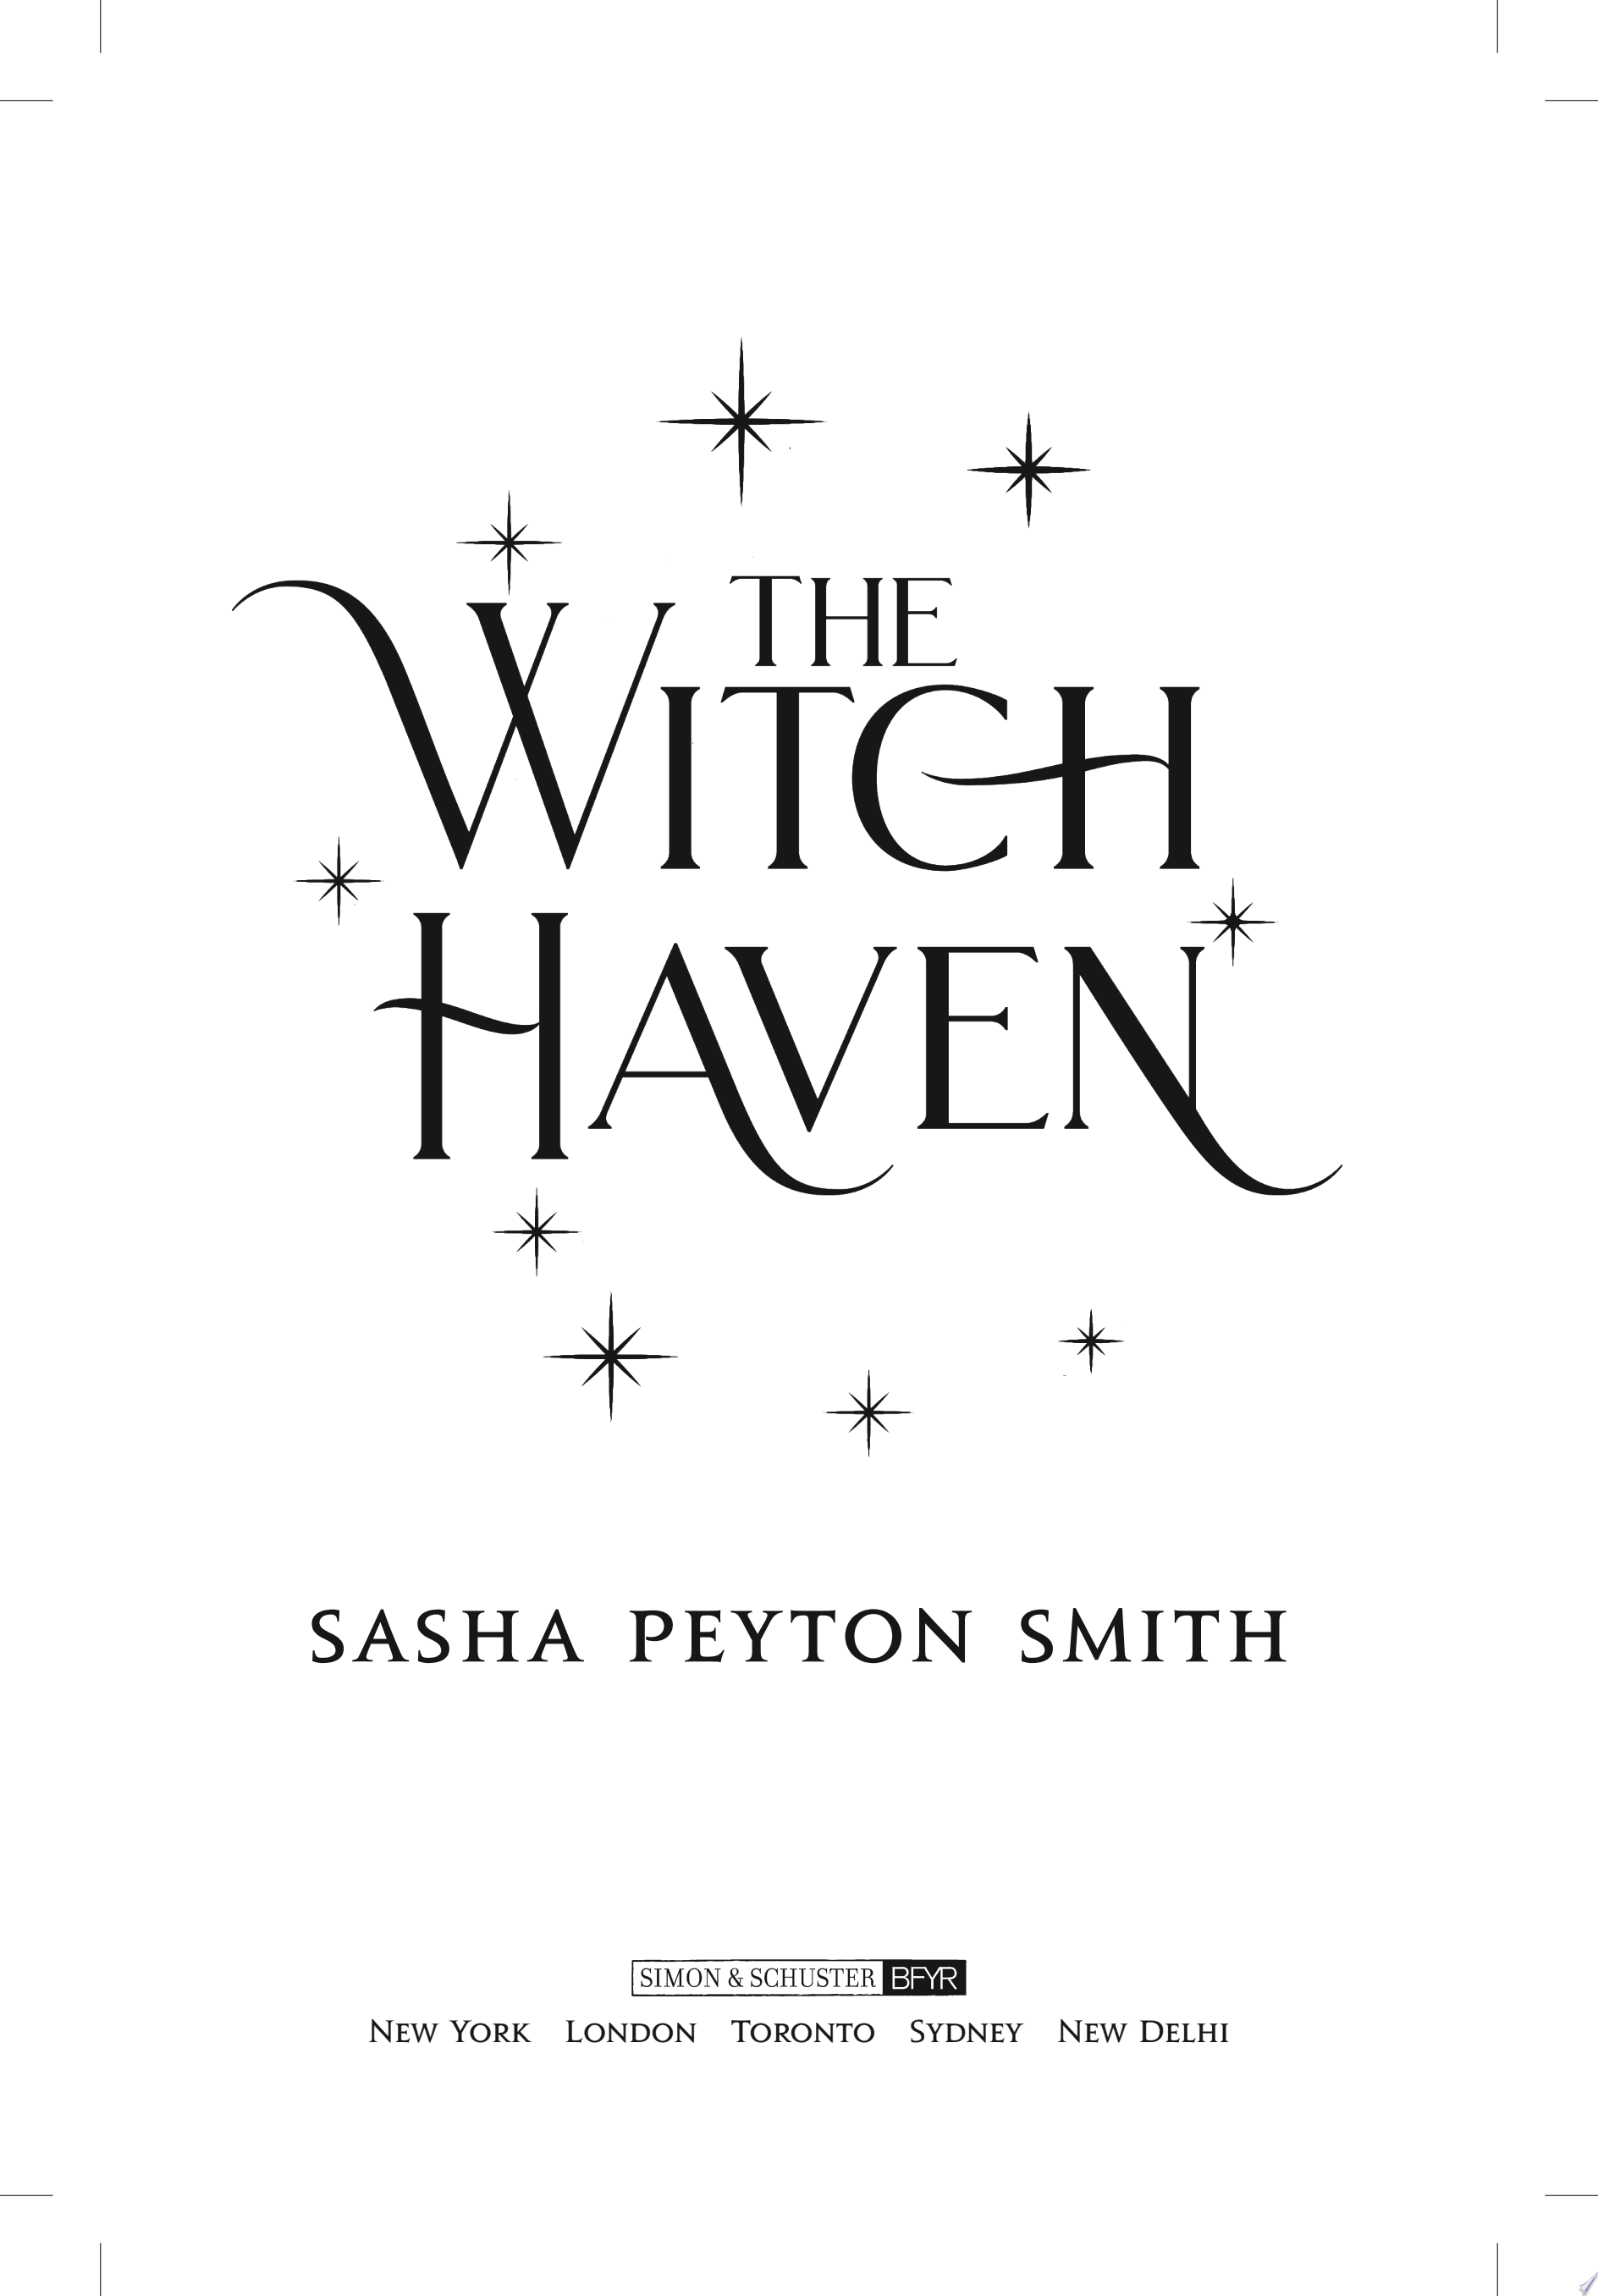 Image for "The Witch Haven"